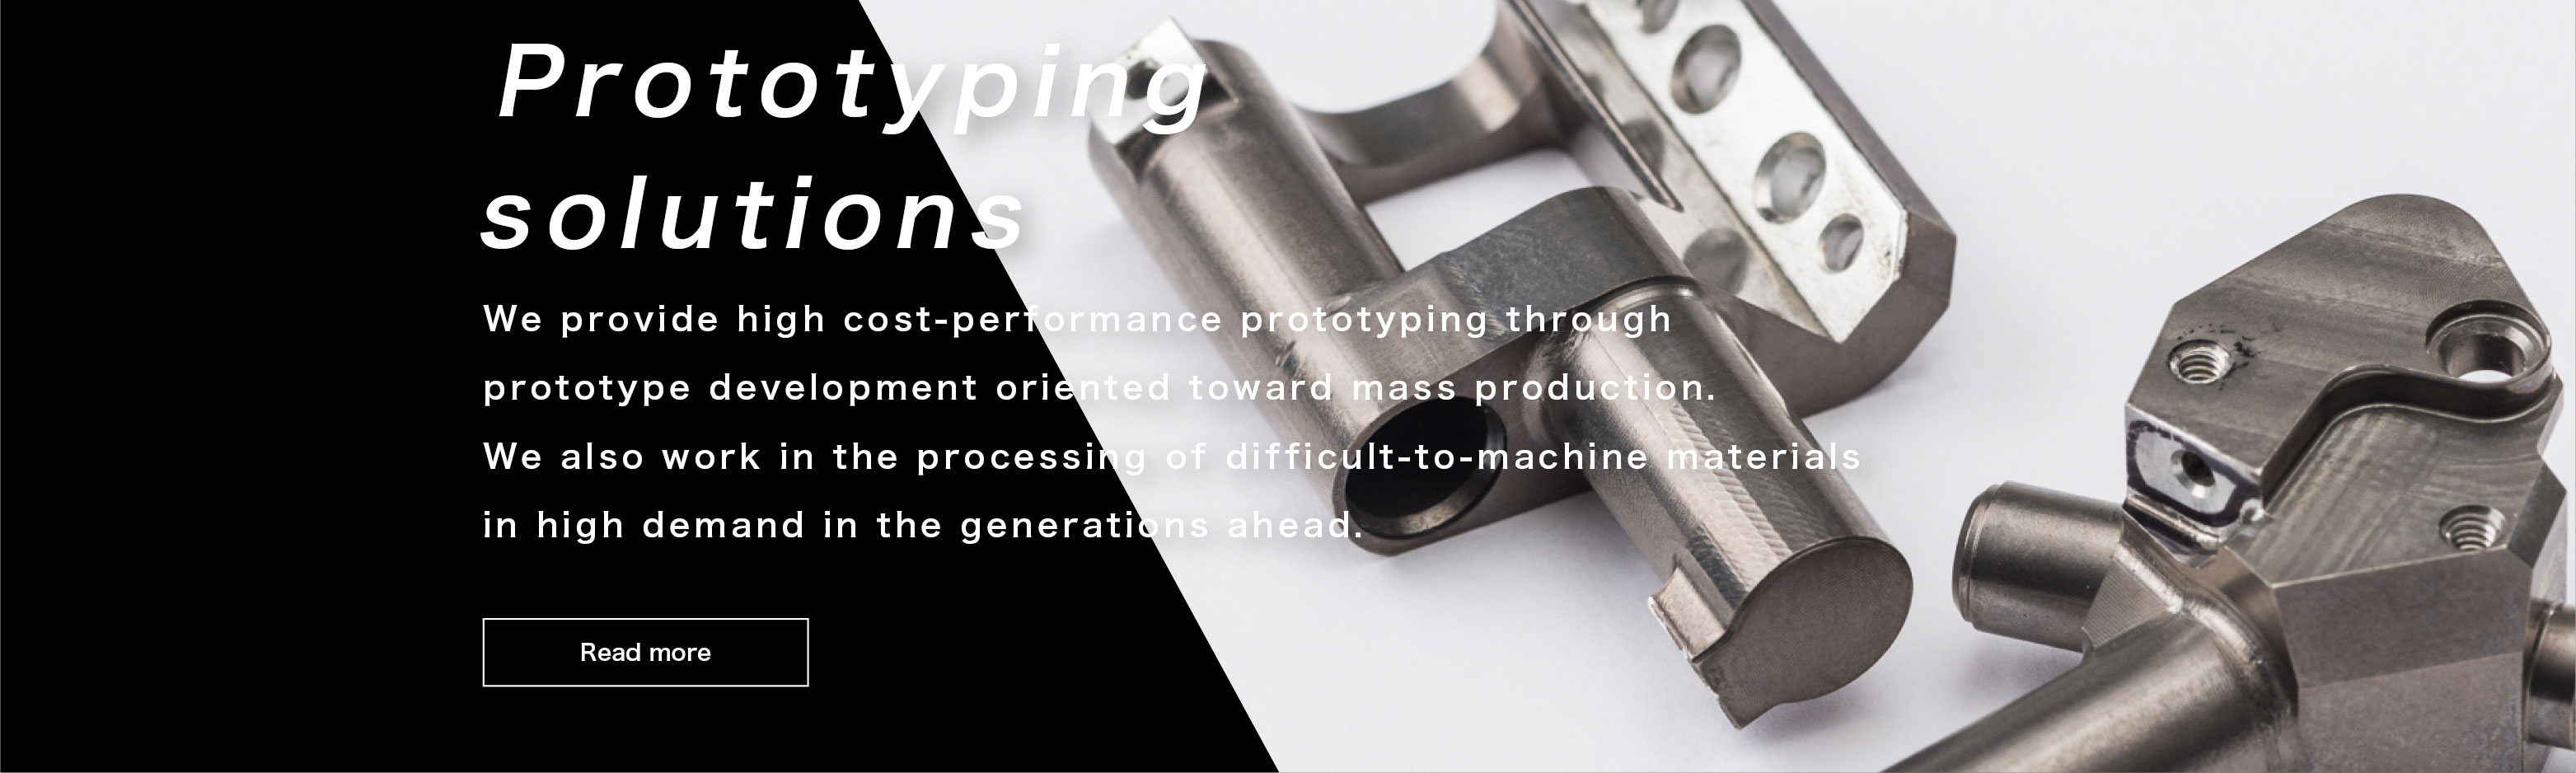 Prototyping solutions We provide high cost-performance prototyping through prototype development oriented toward mass production. We also work in the processing of difficult-to-machine materials in high demand in the generations ahead.